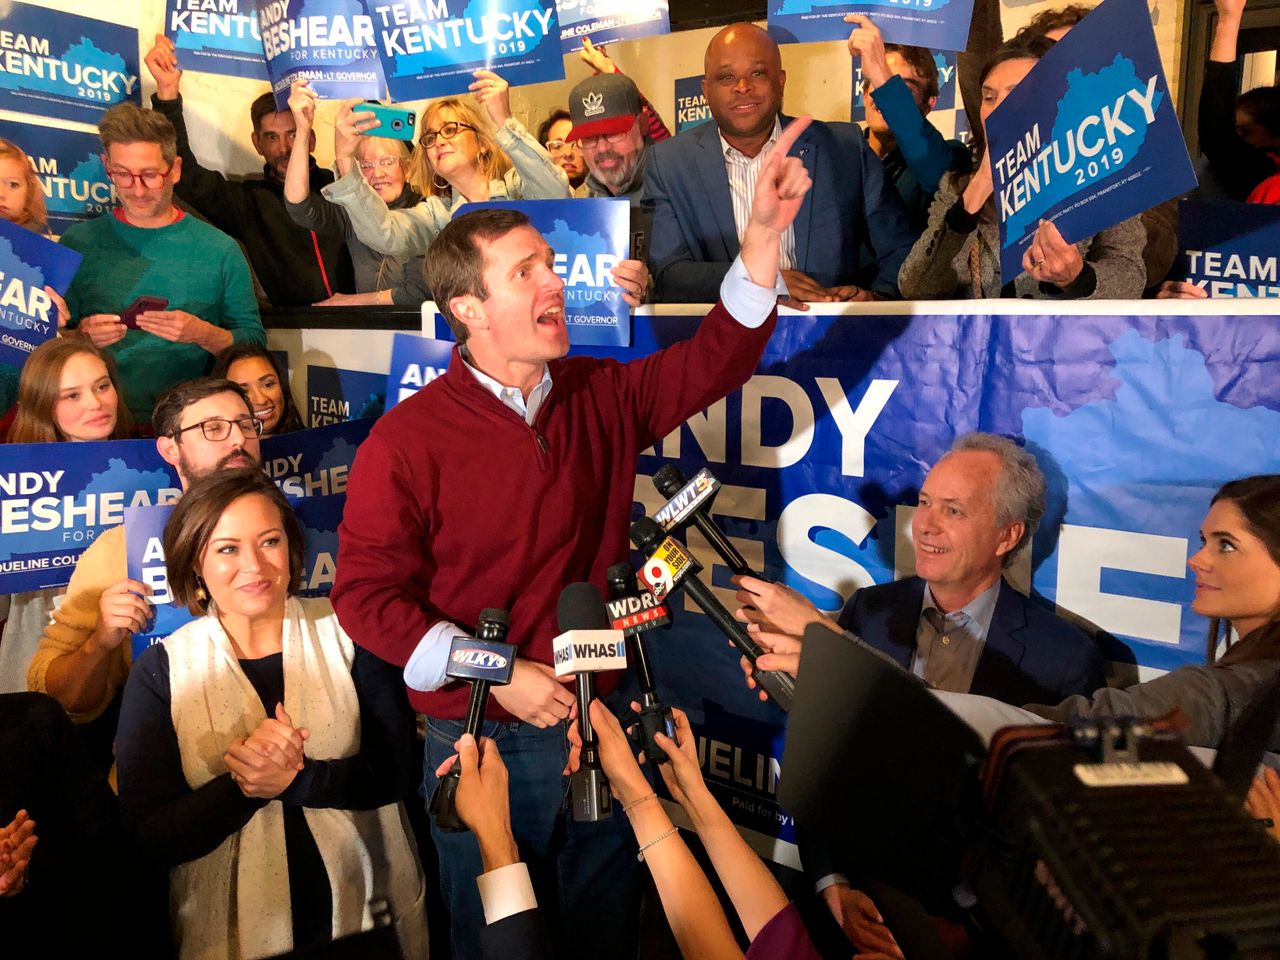 Democrat Andy Beshear speaks to supporters after a daylong tour of Kentucky on the last night of the campaign for governor, in Louisville, Kentucky, Nov. 4, 2019. Beshear traveled the state as his opponent, Republican Gov. Matt Bevin, welcomed President Donald Trump for a rally Monday night in Lexington.